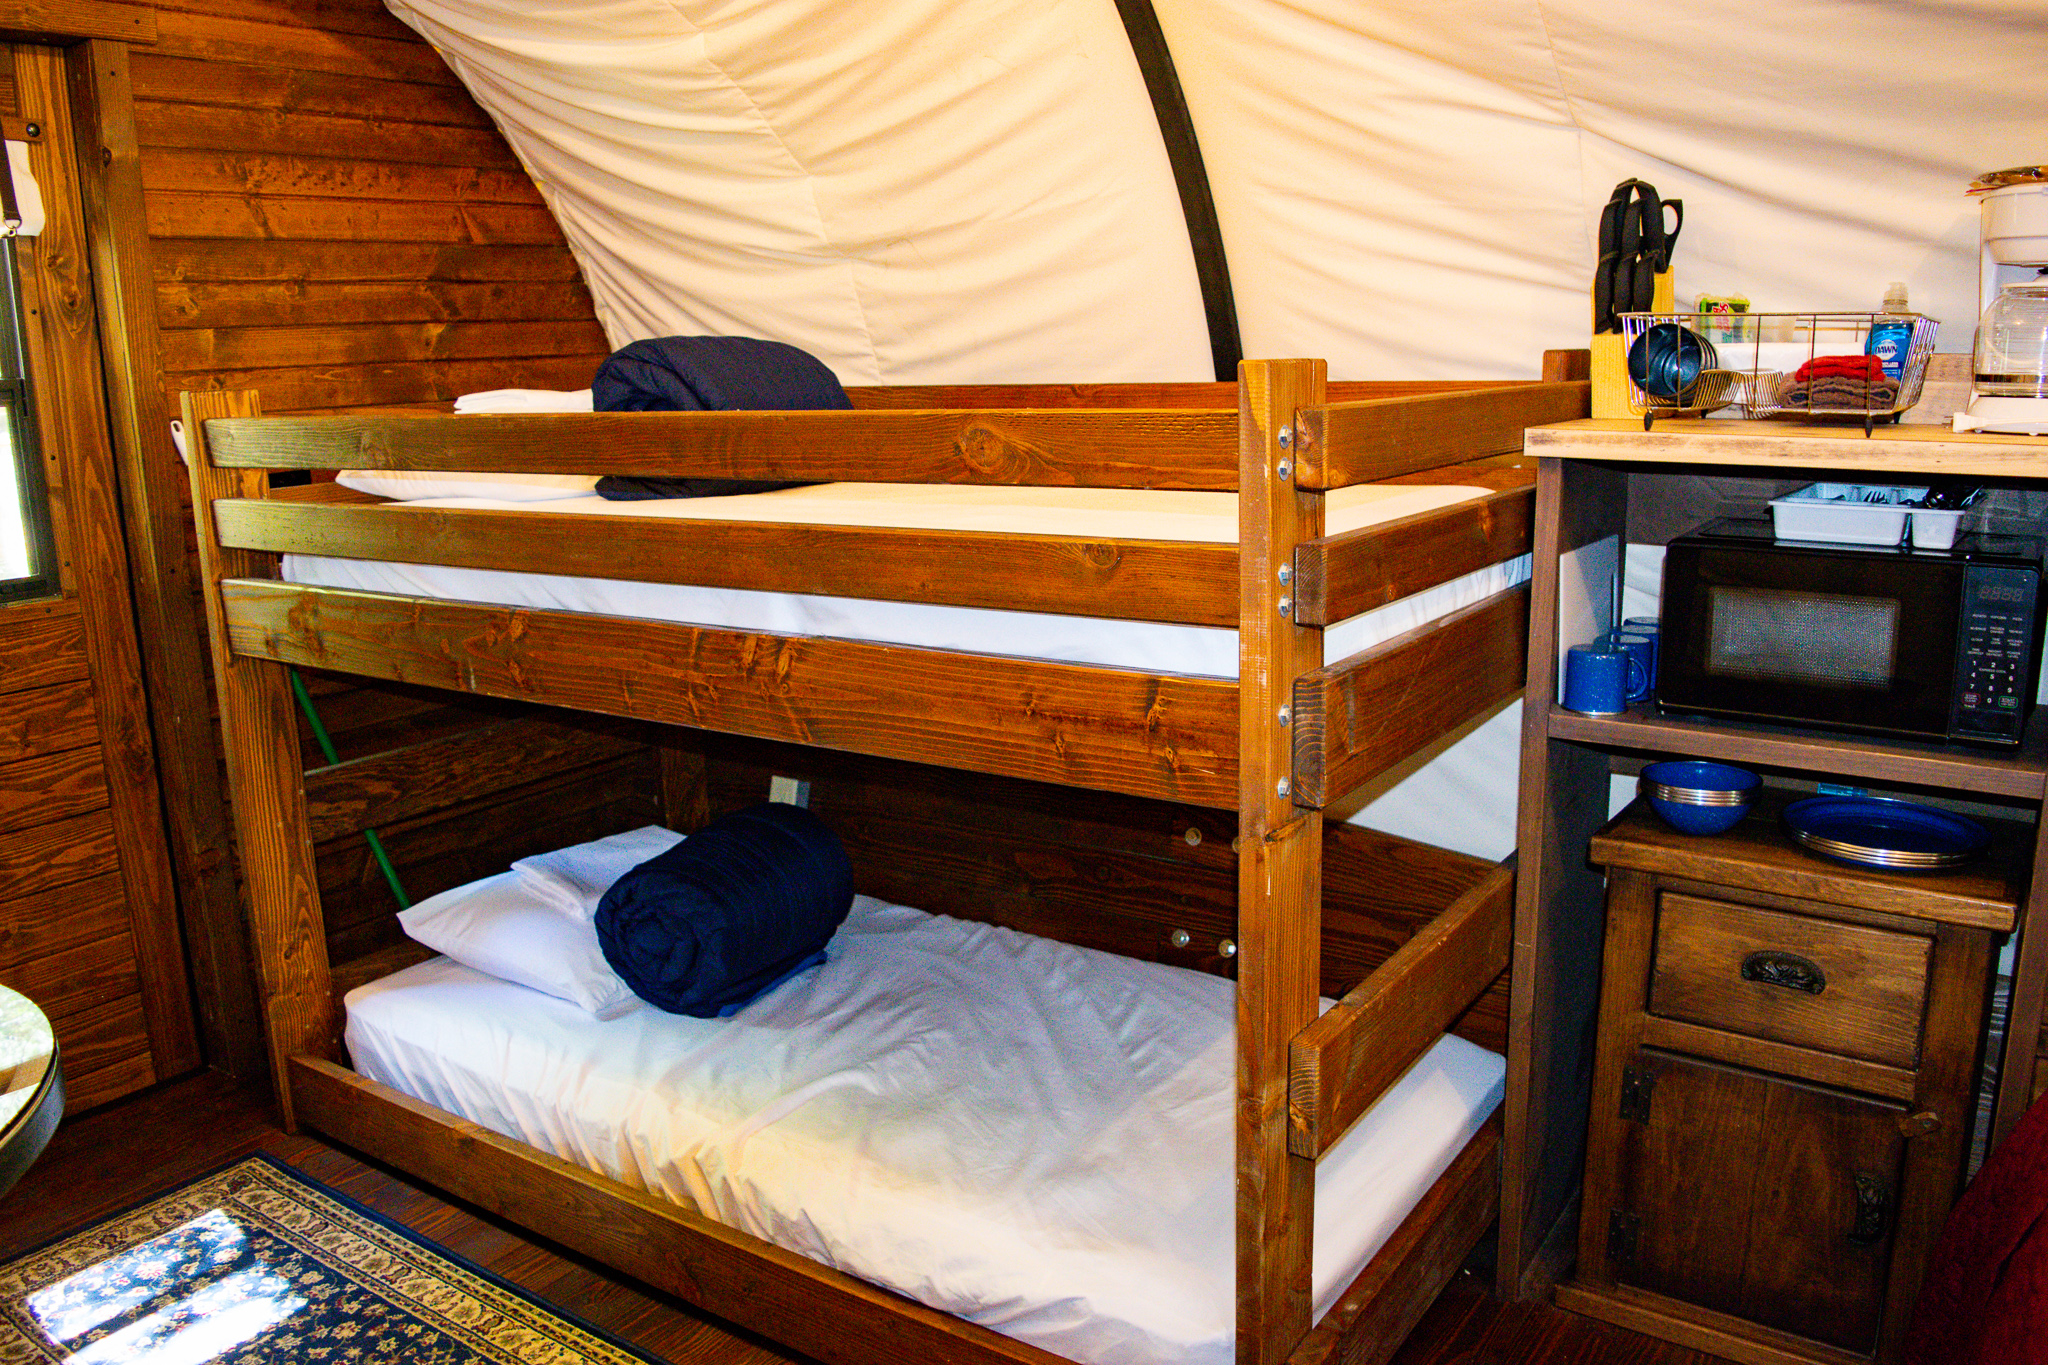 Covered Wagon Bunk Beds